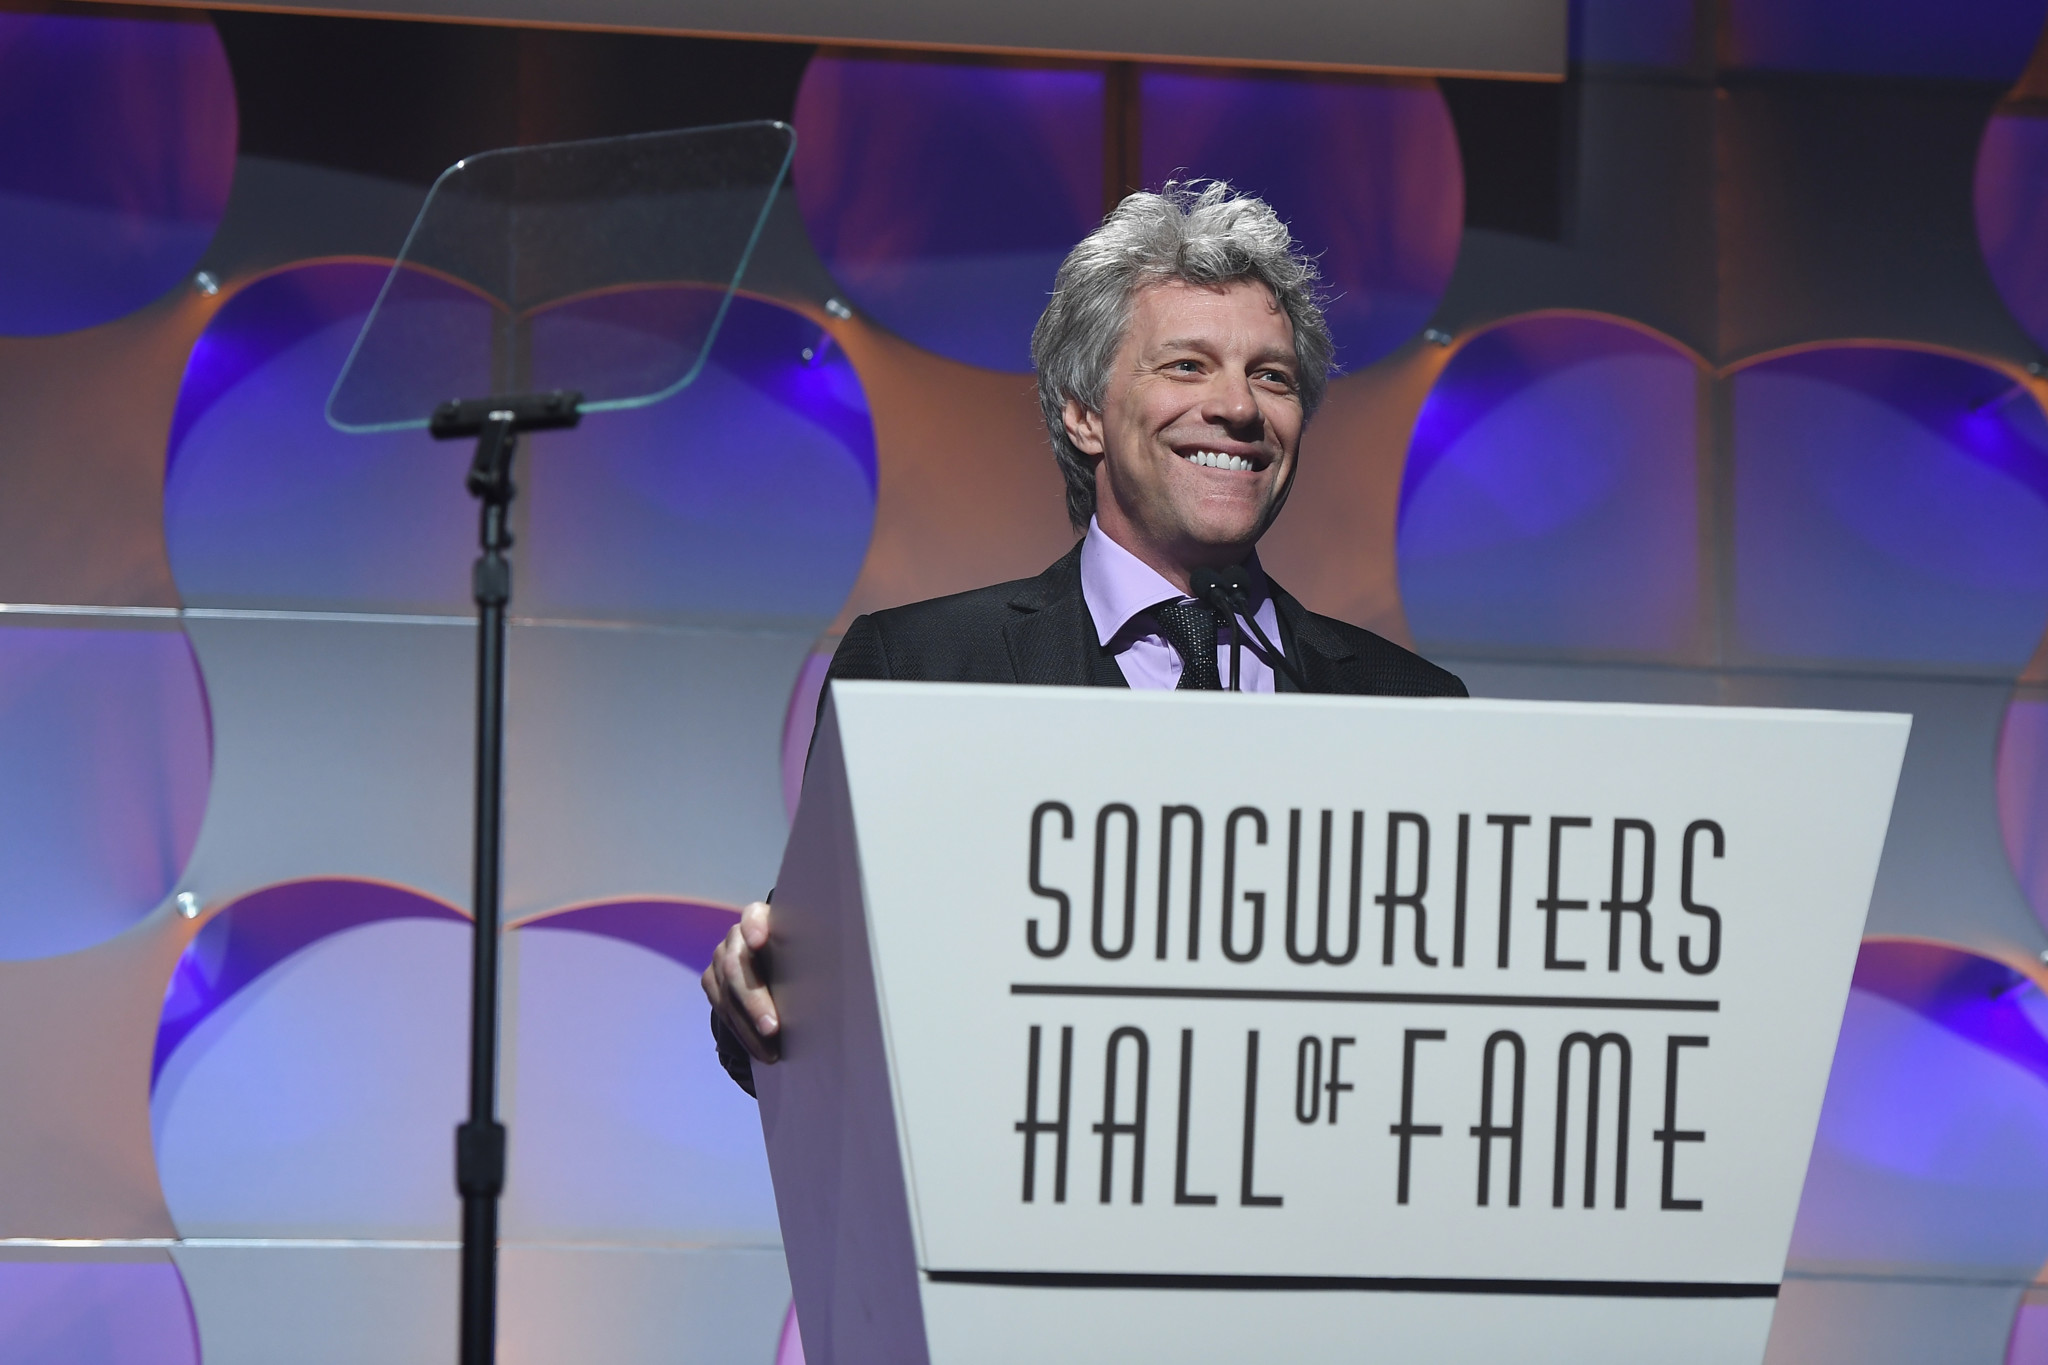 Photos from the 48th Annual Songwriters Hall of Fame Induction and Awards